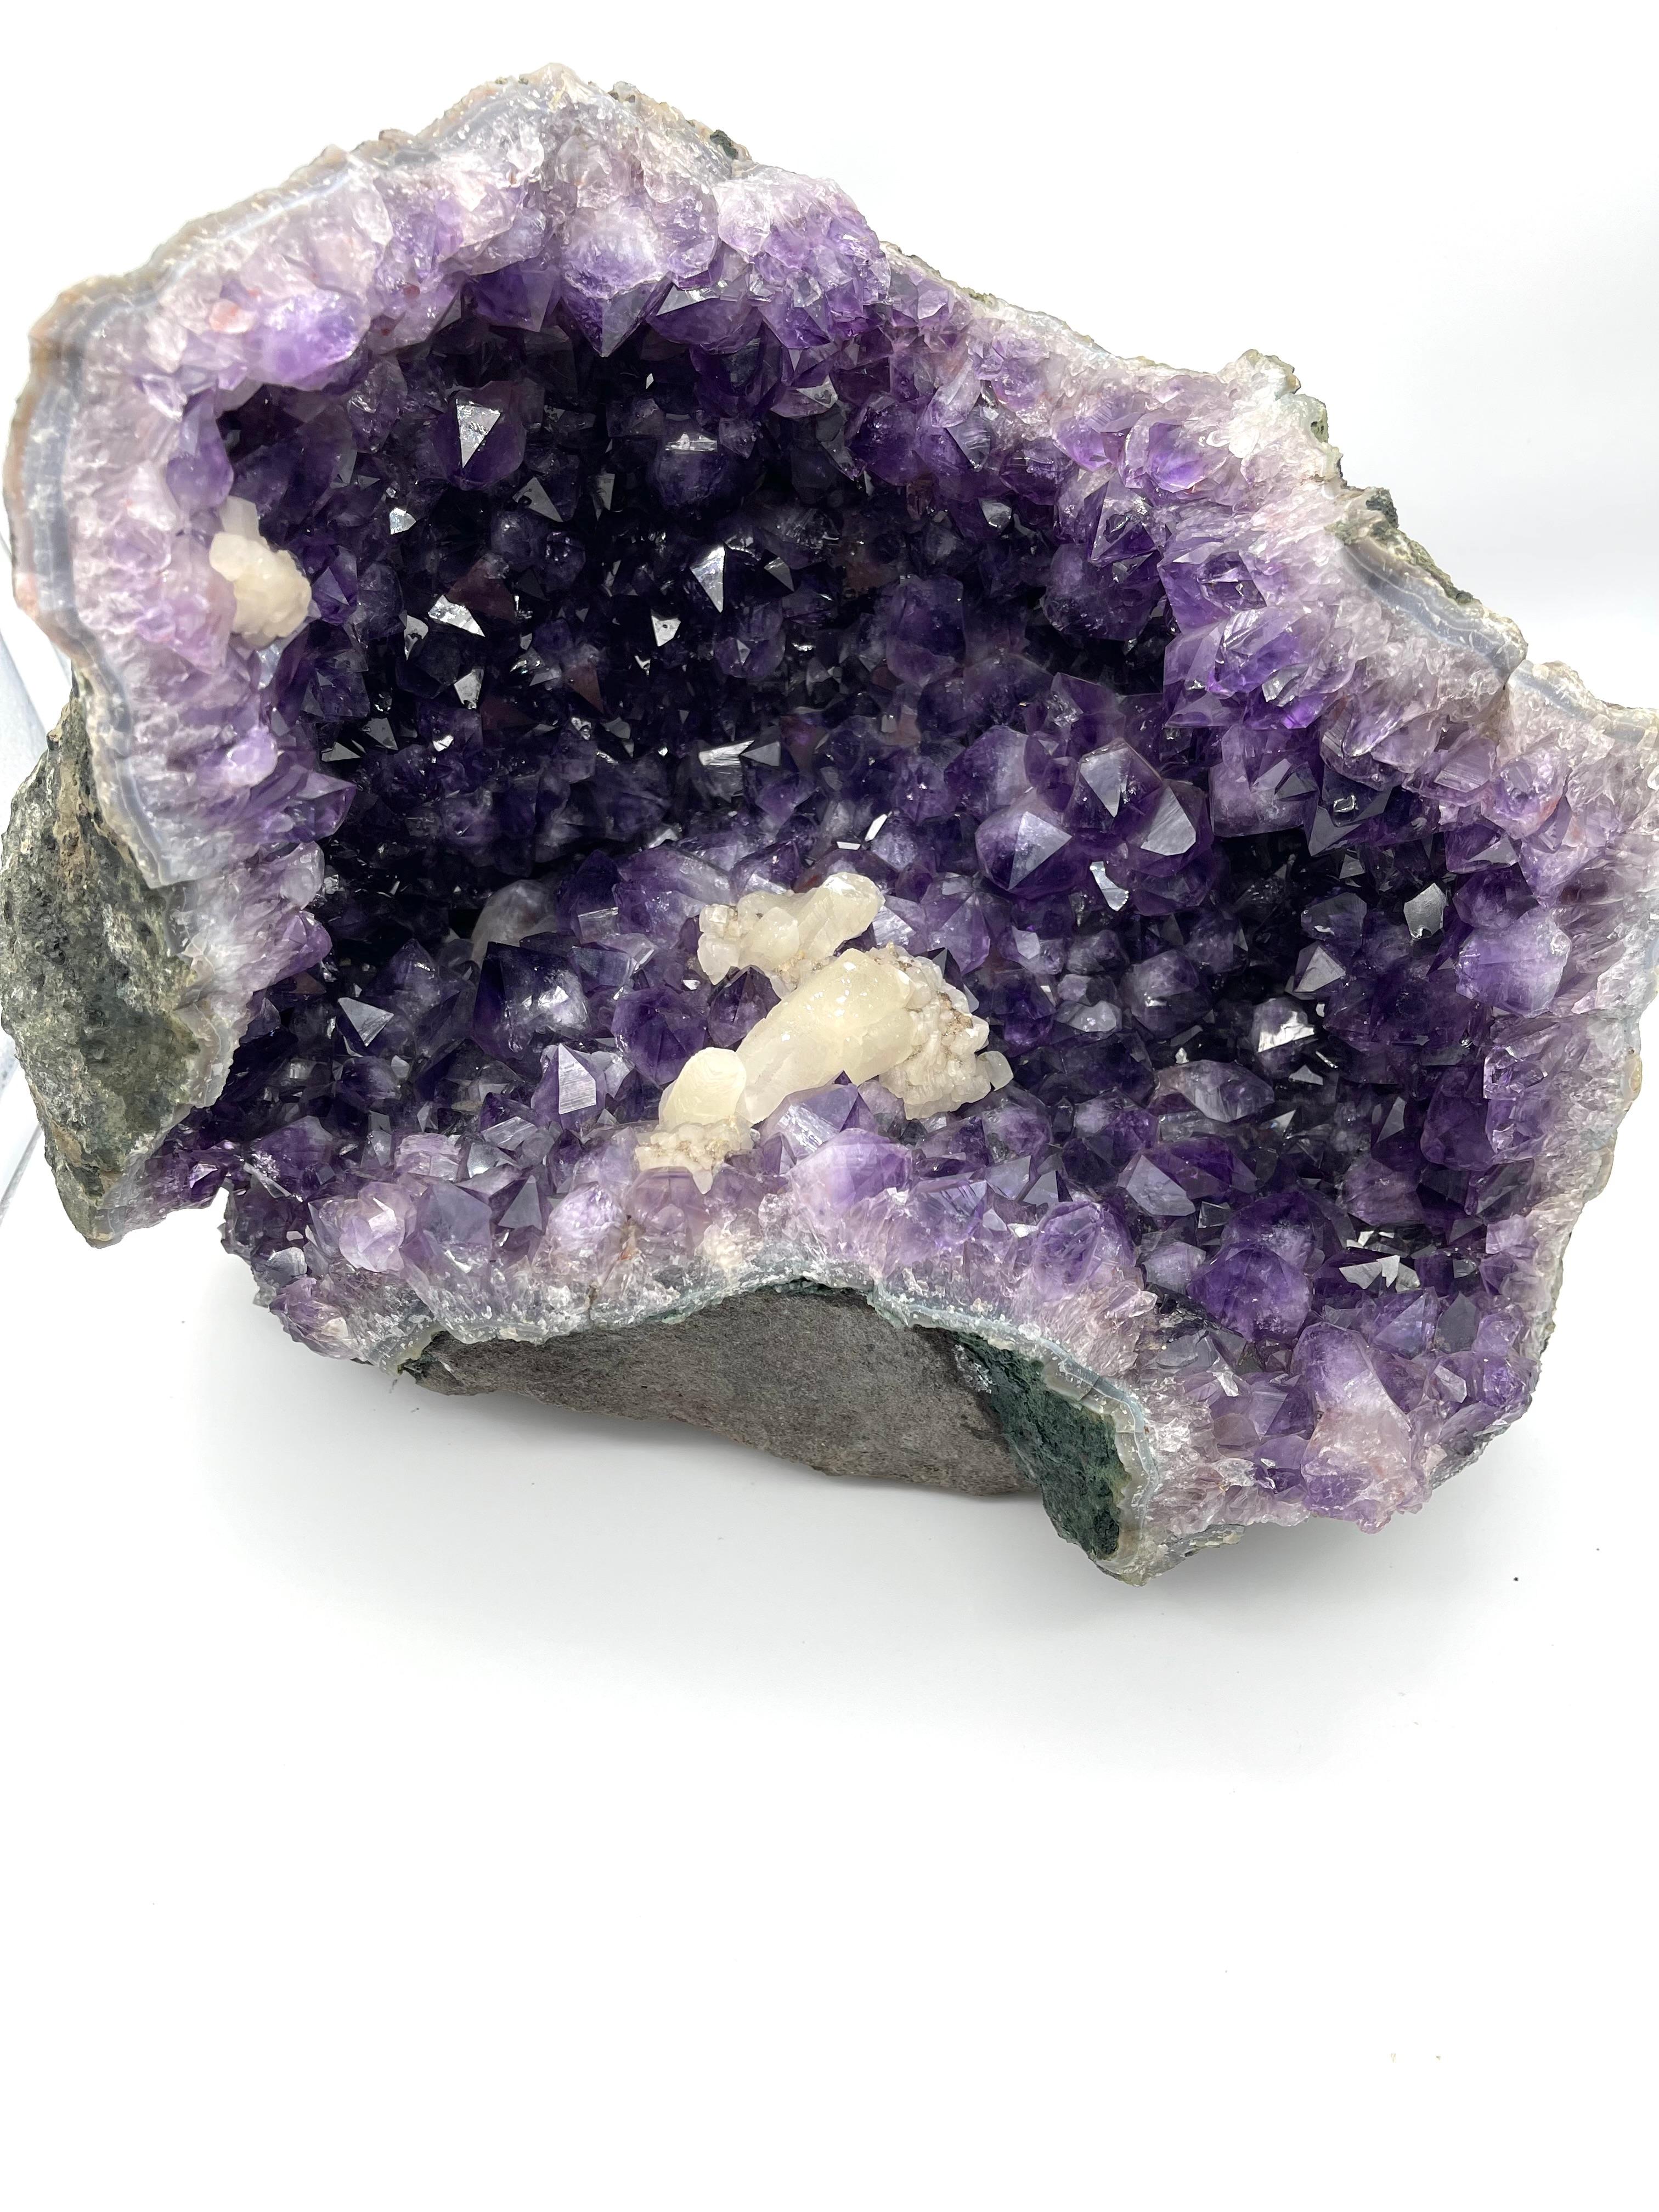 Large geode amethyste with quartz from Morvan France 46lbs 21kg For Sale 1